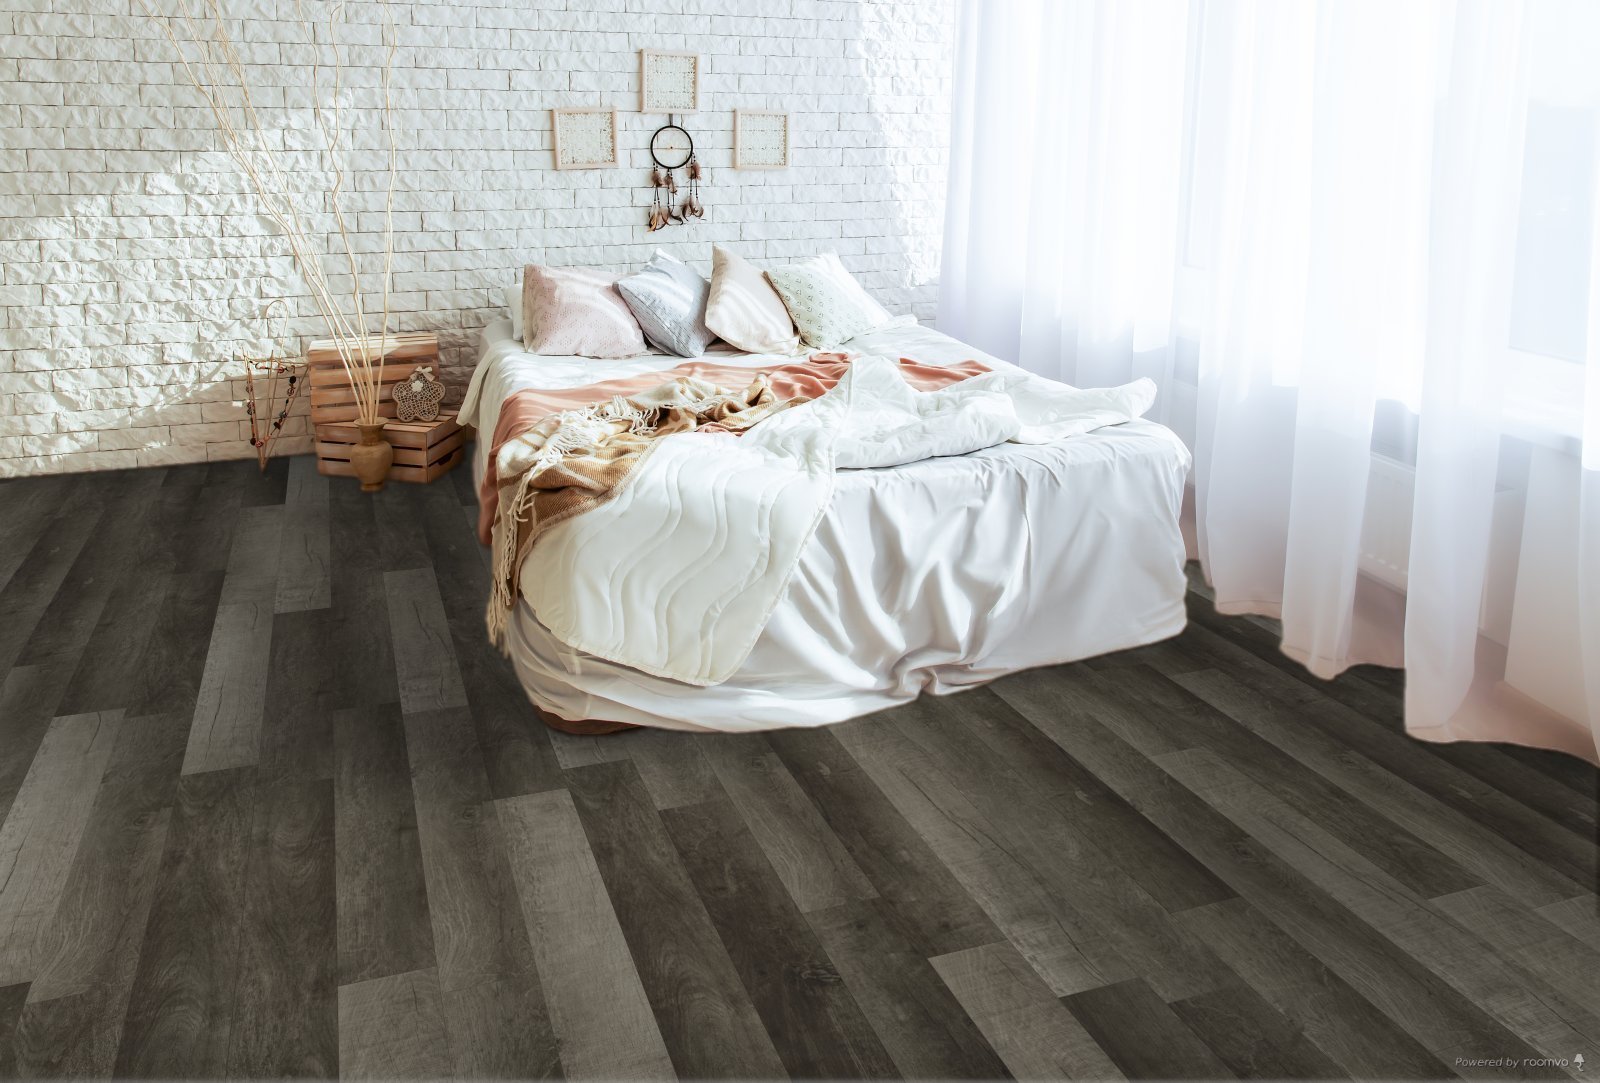 Horizen Flooring presents to you a picture of a quality wide plank Rocheport luxury vinyl plank. NovoCore Q Merengue collection features a wide range of colors & designs that will compliment any interior. Natural wood grain synchronized surface allow for an authentic hardwood look & feel. This collection features a 0.3″ / 7.5 mm overall thickness and a durable 22 mil / 0.55 mm wear layer for residential and commercial applications.